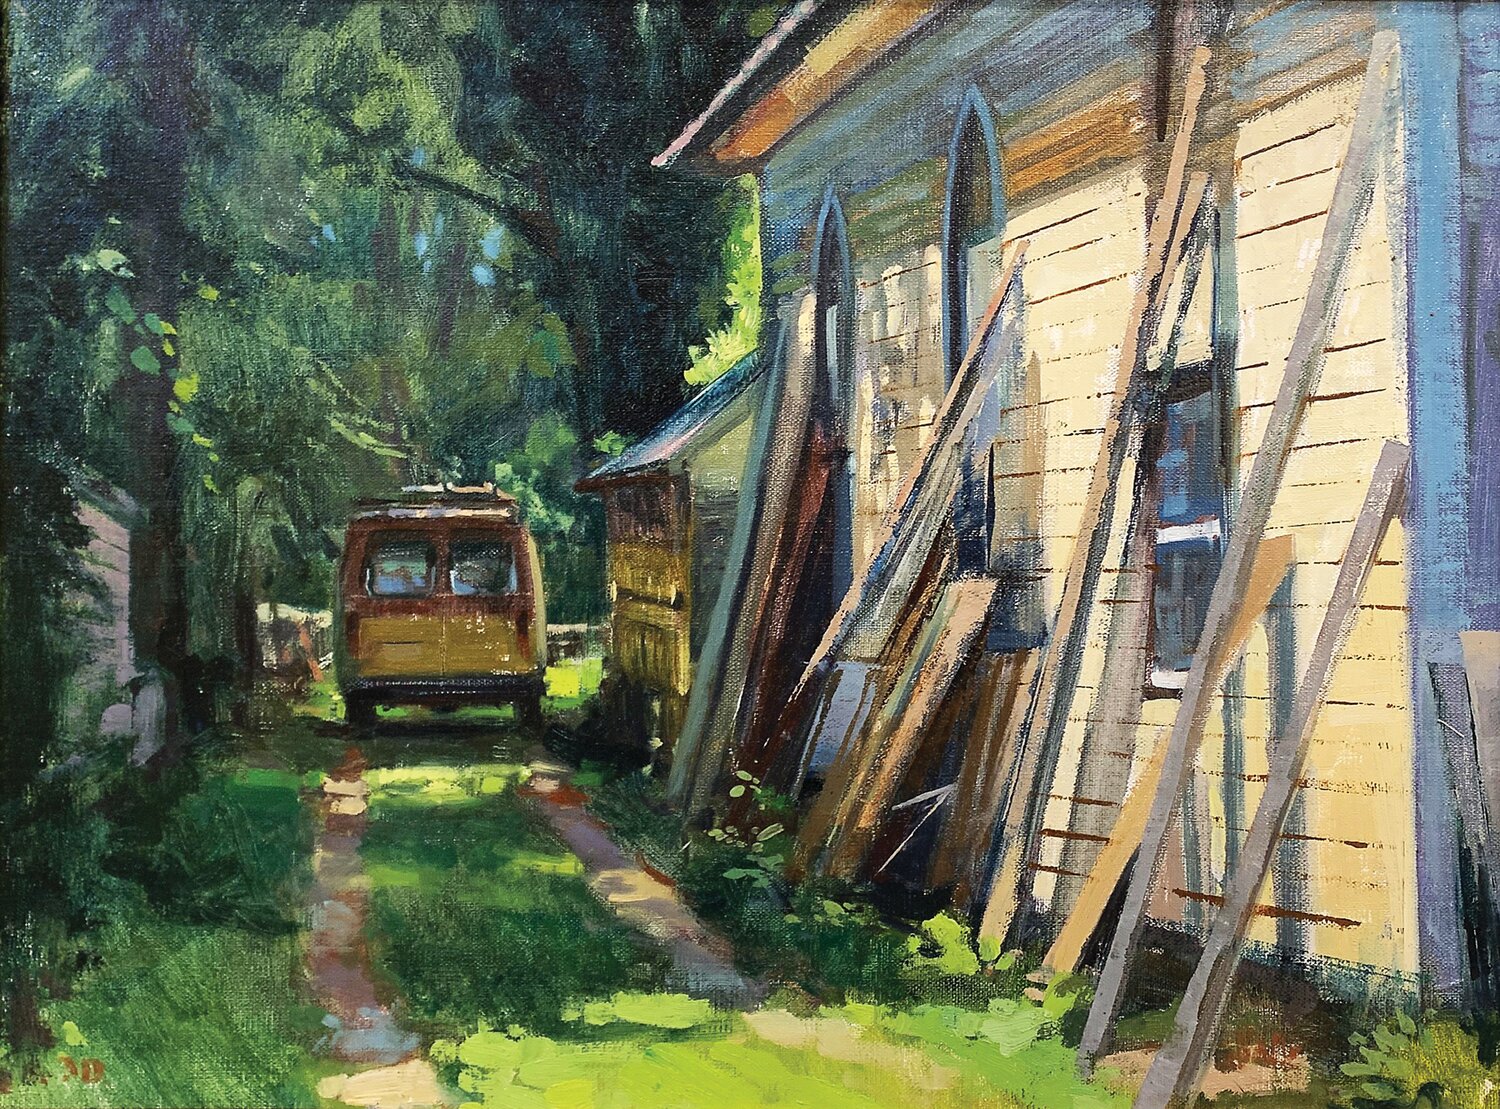 While painting at a Plein Air Easton event in Maryland, Matt DeProspero was drawn to this behind-the-scenes view. He created “Lean-to.” To see more of DeProspero’s studio and plein air paintings, visit www.LambertvilleMADE.com.